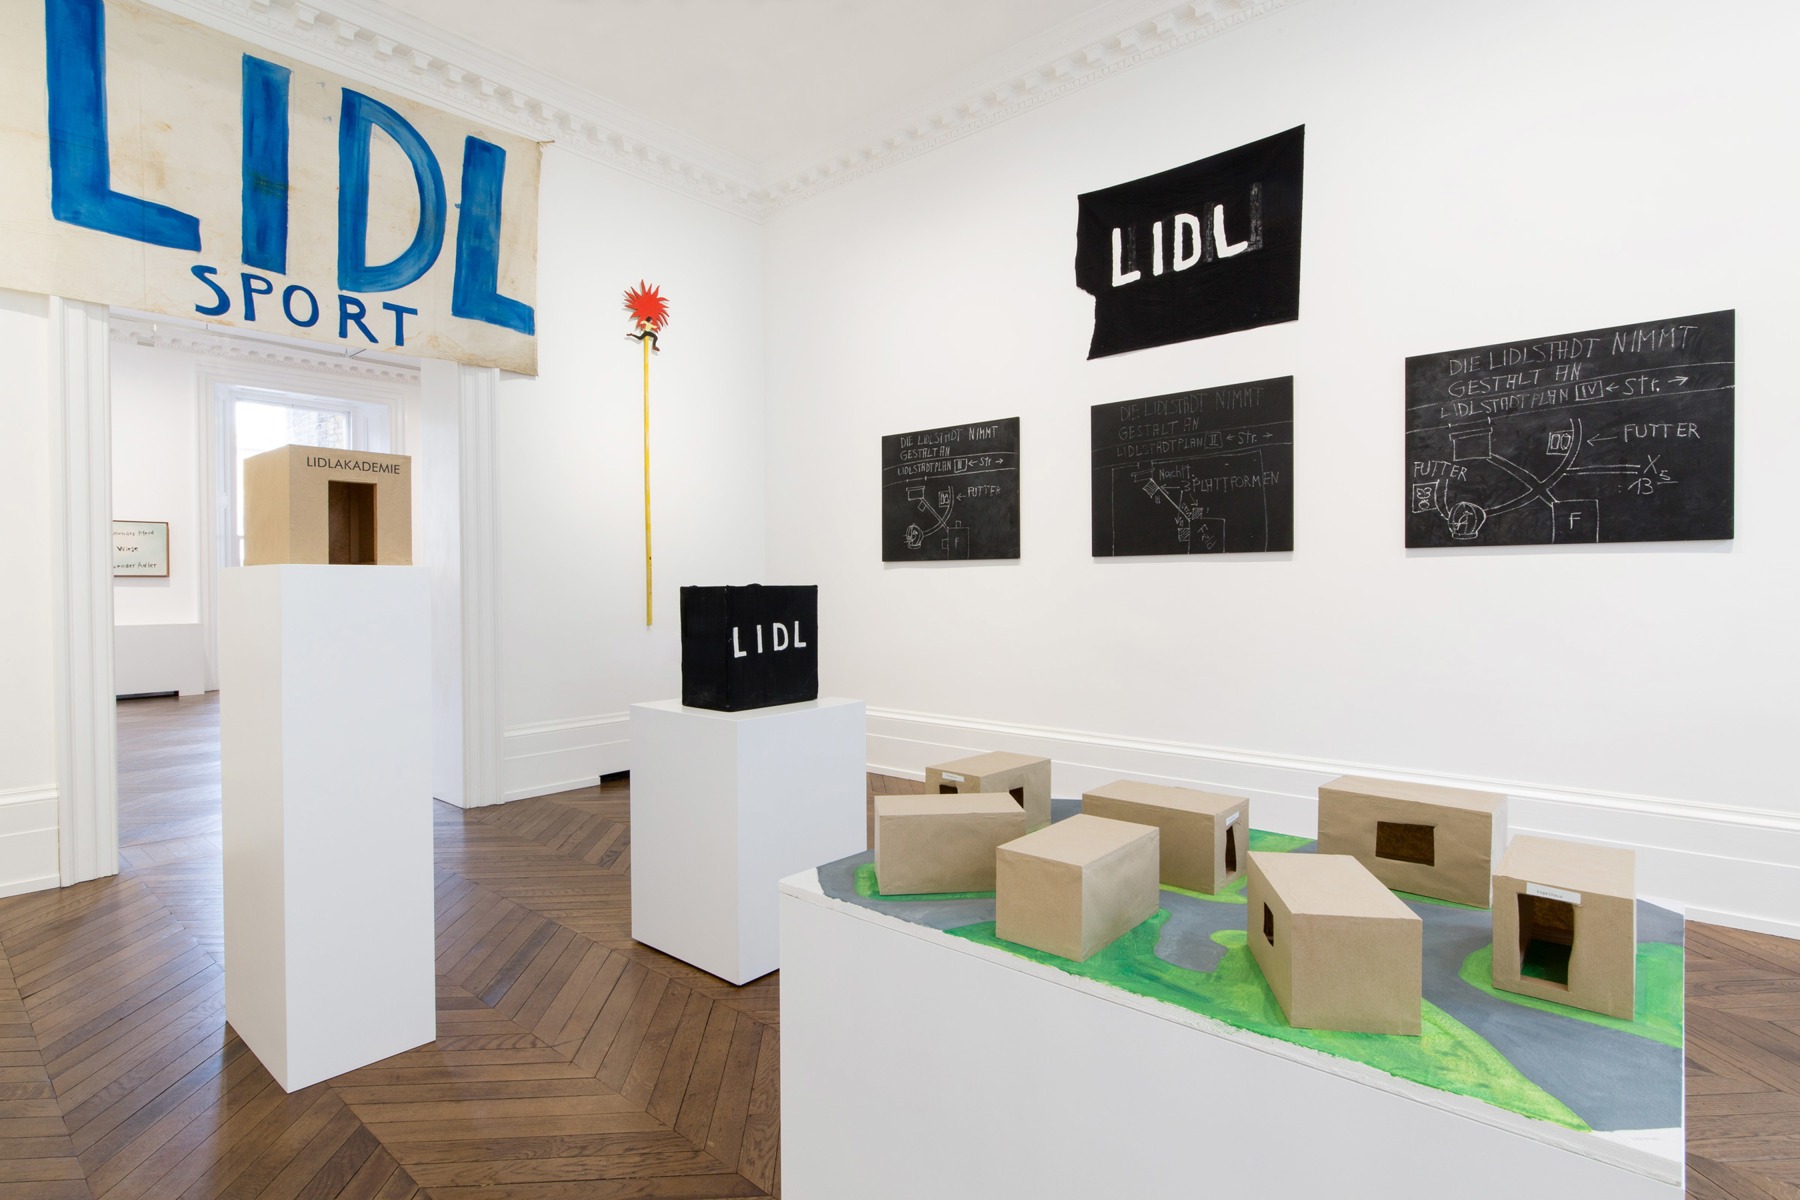 J&Ouml;RG IMMENDORFF LIDL Works and Performances from the 60s and Late Paintings after Hogarth 12 May through 2 July 2016 MAYFAIR, LONDON, Installation View 6